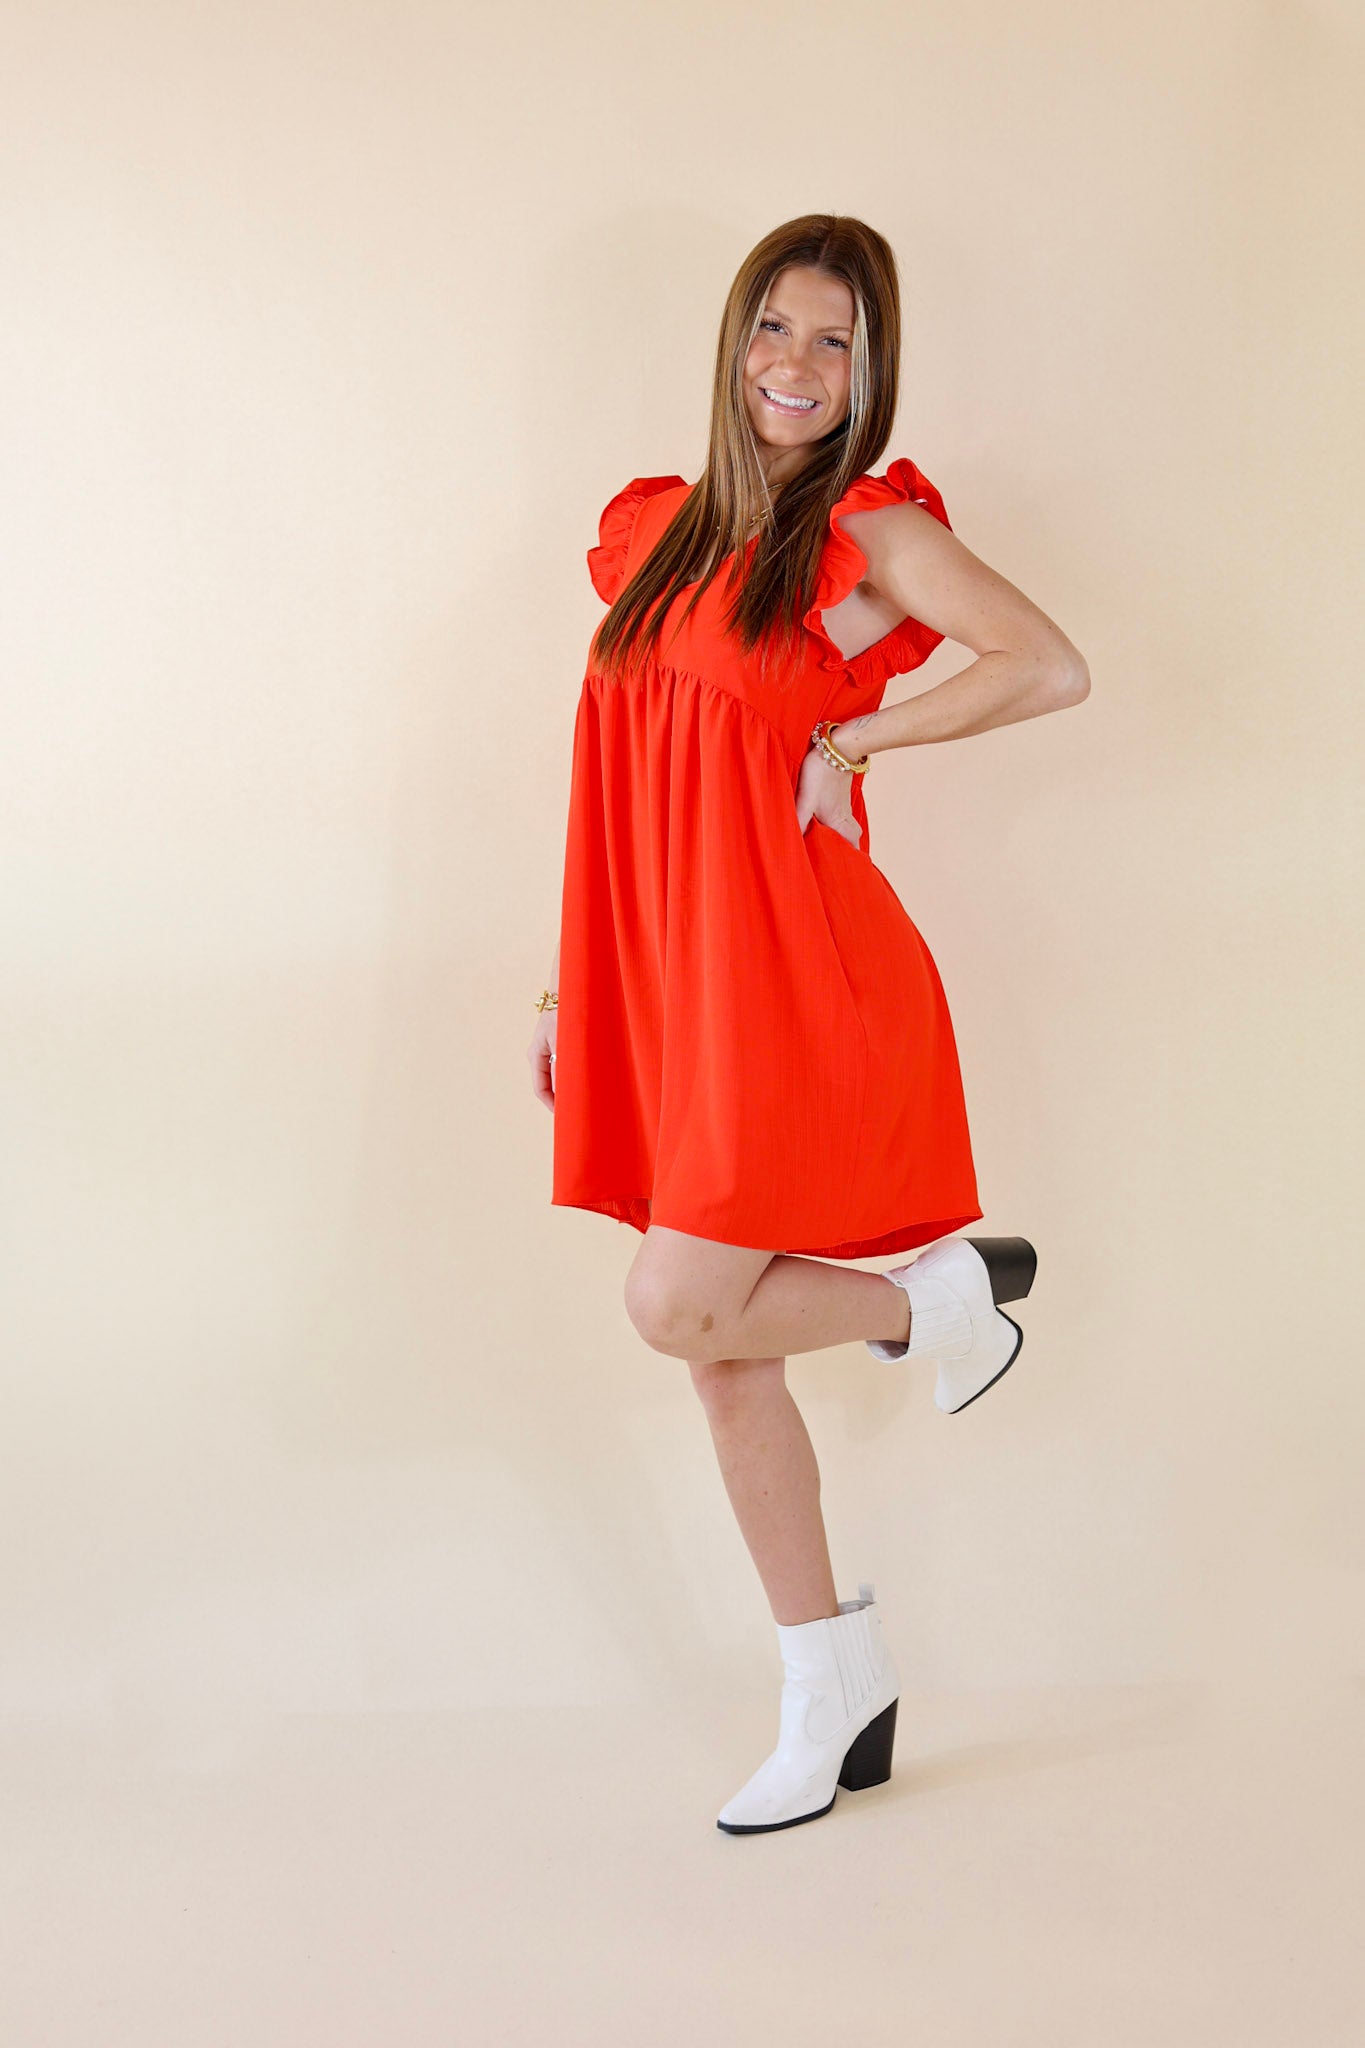 Capture Your Attention V Neck Dress with Ruffle Cap Sleeves in Red - Giddy Up Glamour Boutique